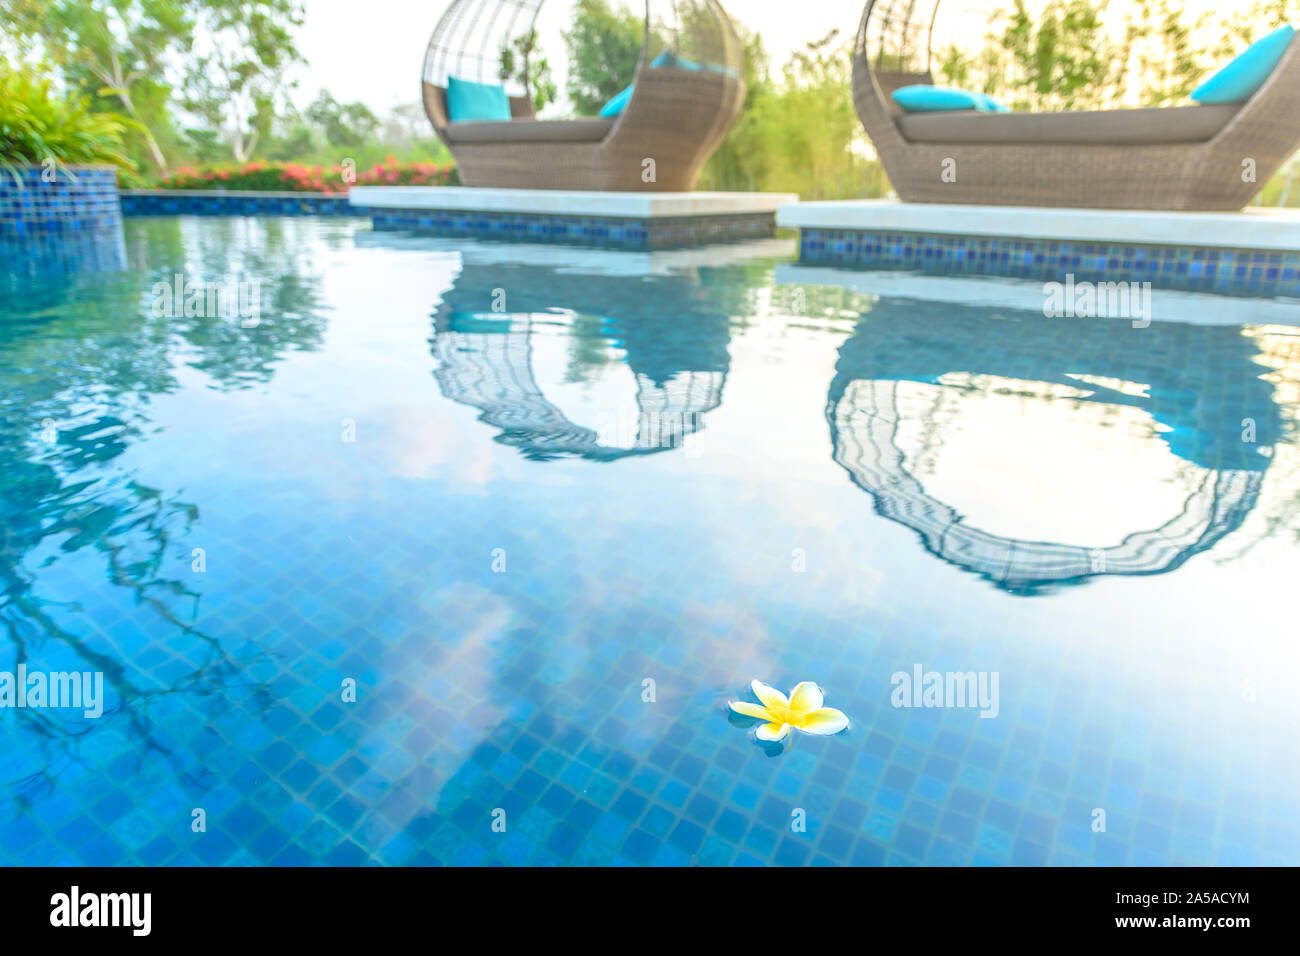 Fangipani Flower floating in a resort pool with daybeds and garden in the background glowing in the morning sunshine - Resort/vacation/travel concept Stock Photo